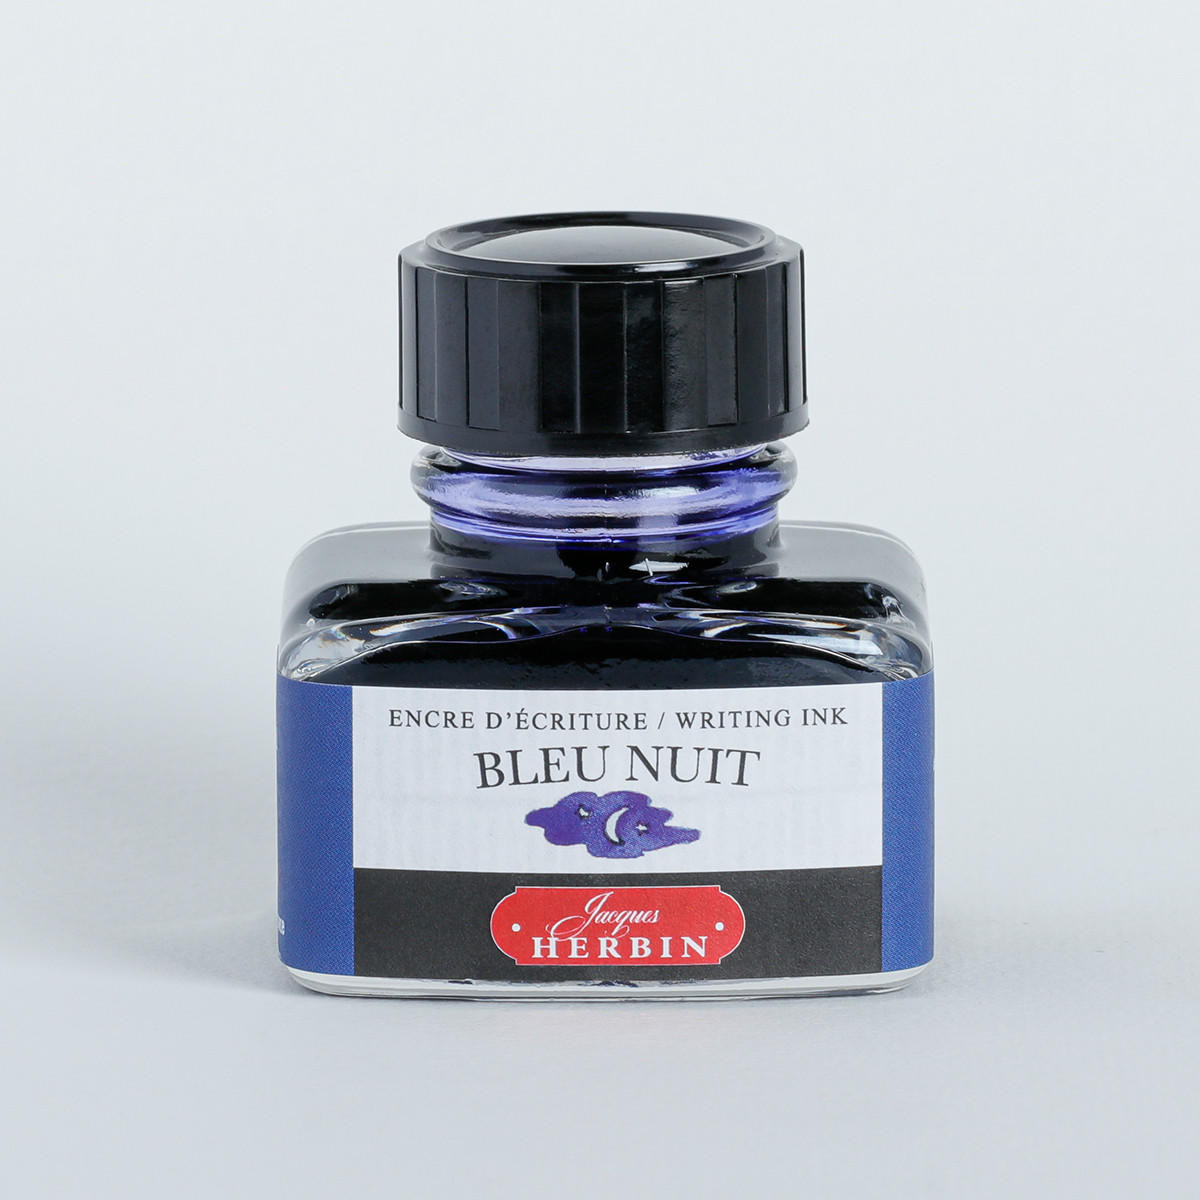 Herbin ’D’ Writing and Drawing Ink 30ml Bleu Nuit